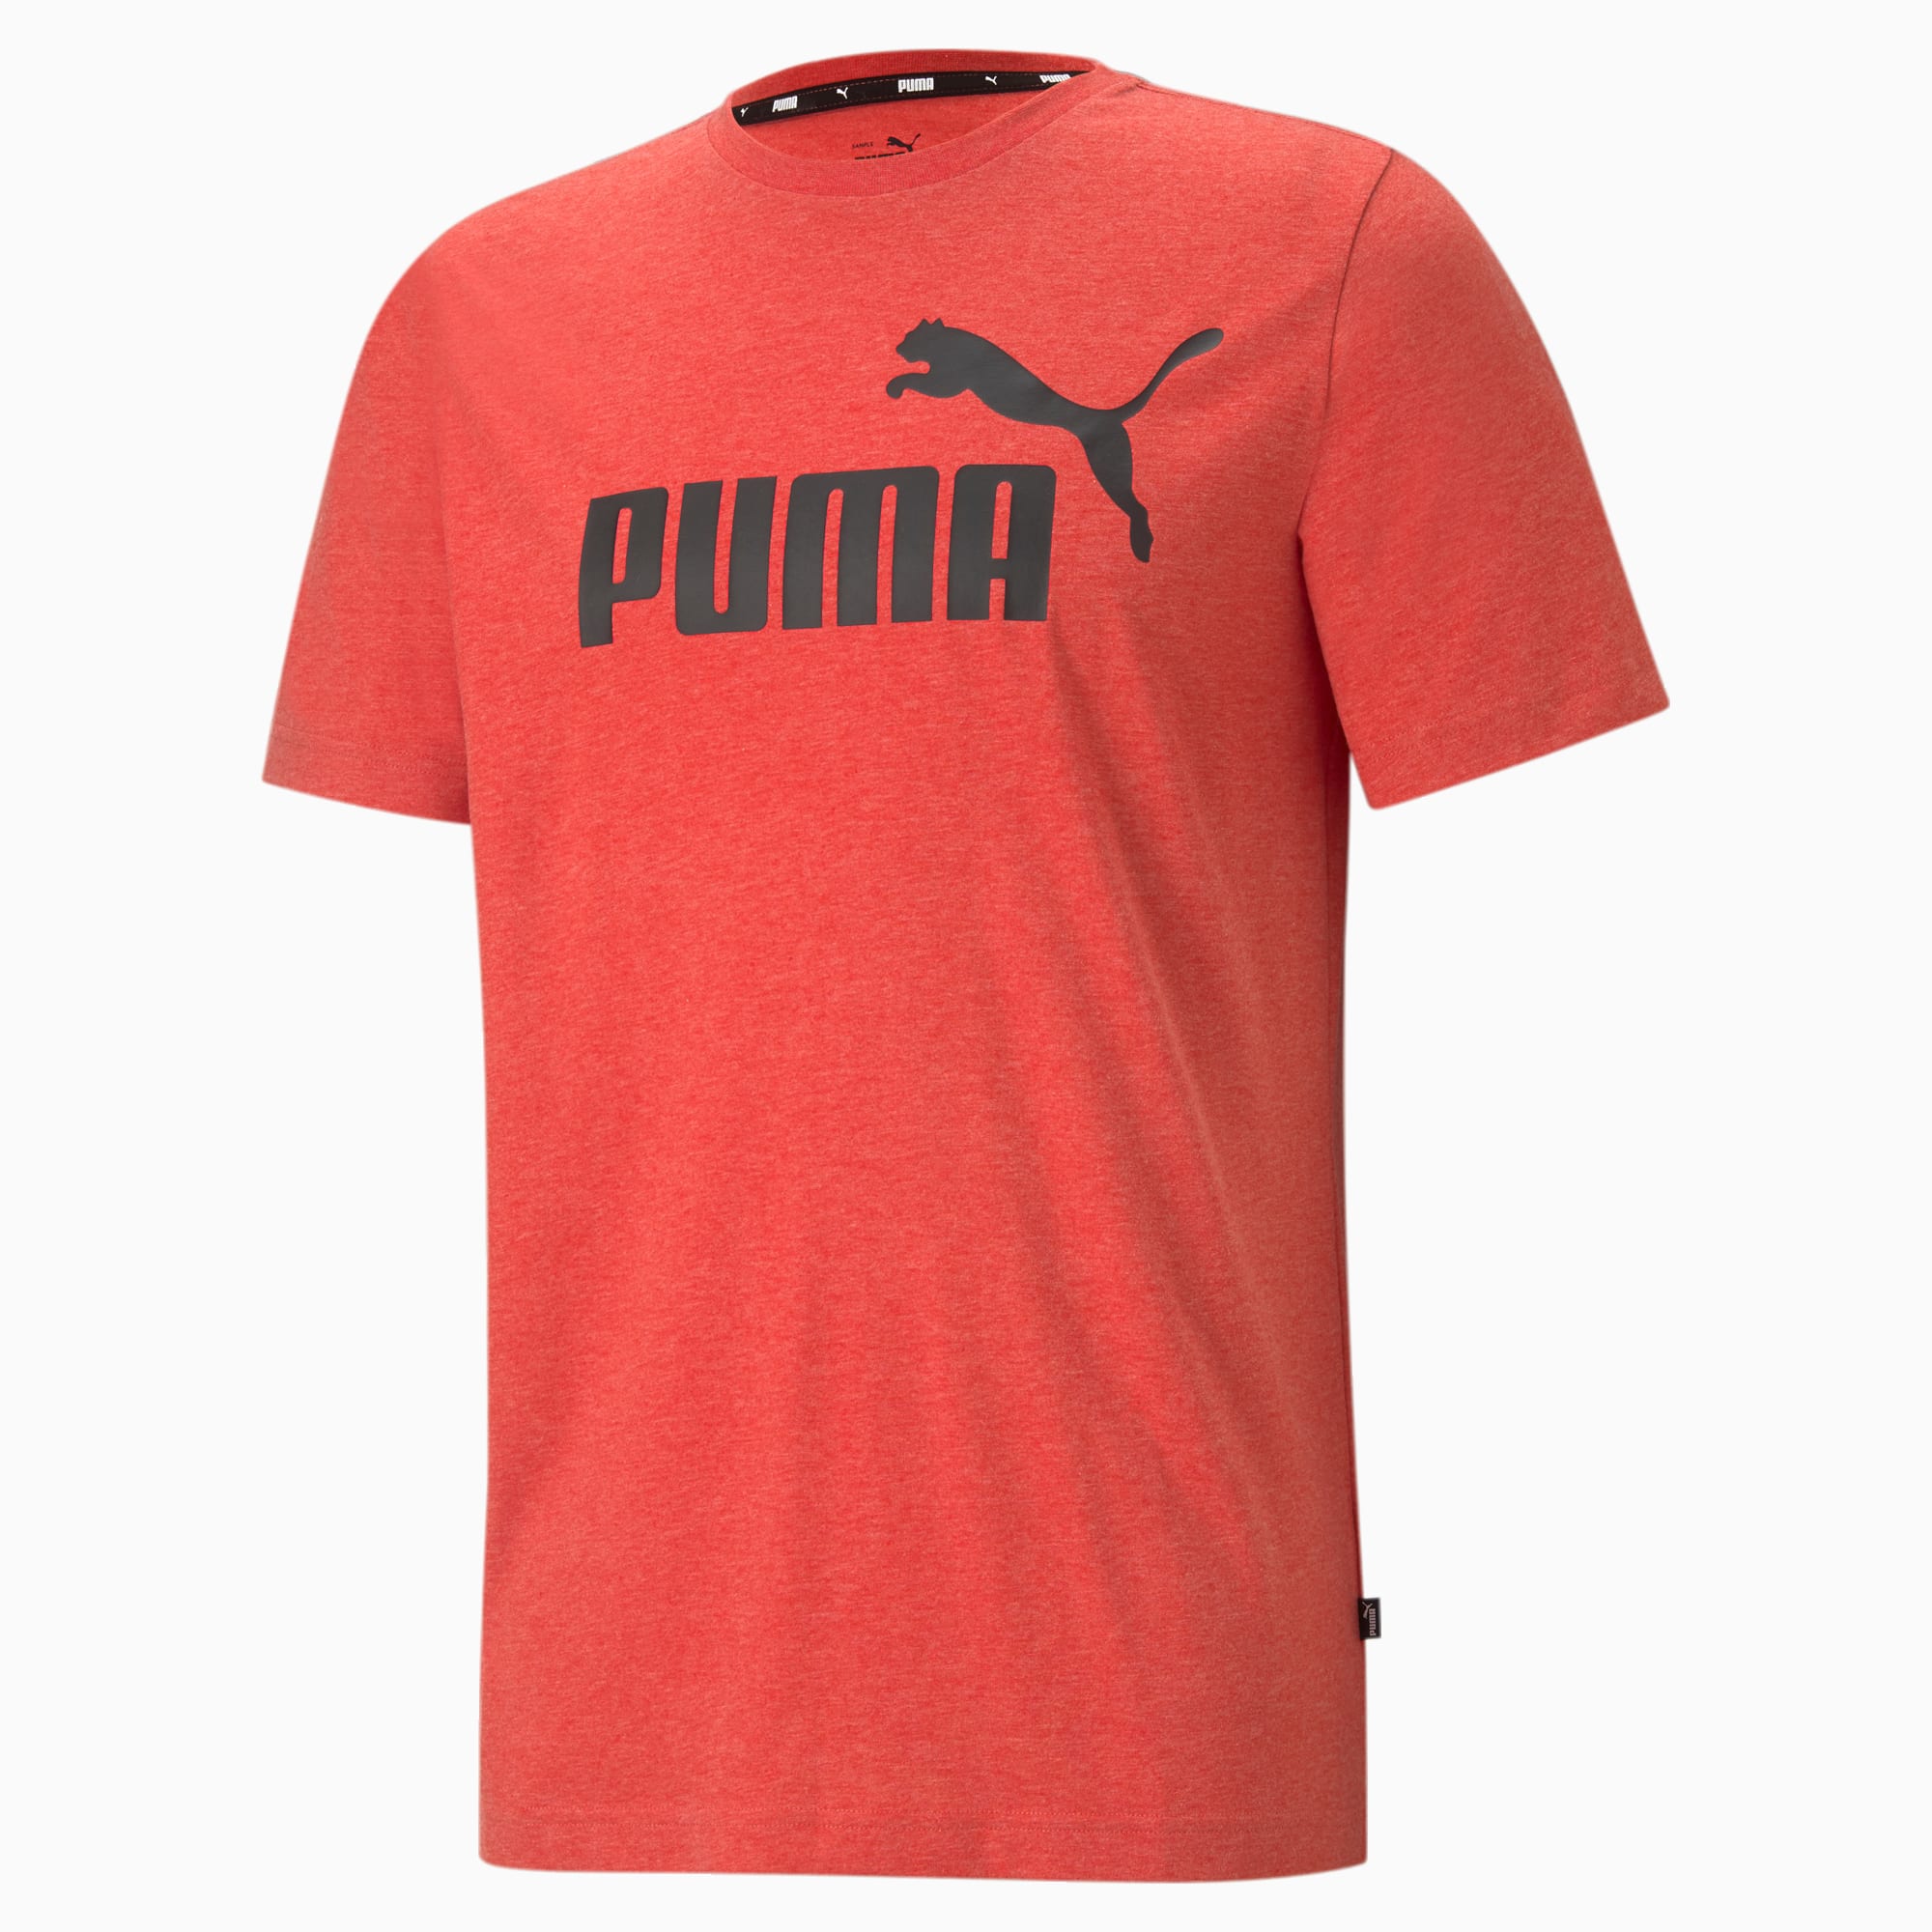 PUMA Essentials Heather Men's T-Shirt, High Risk Red, Size S, Clothing